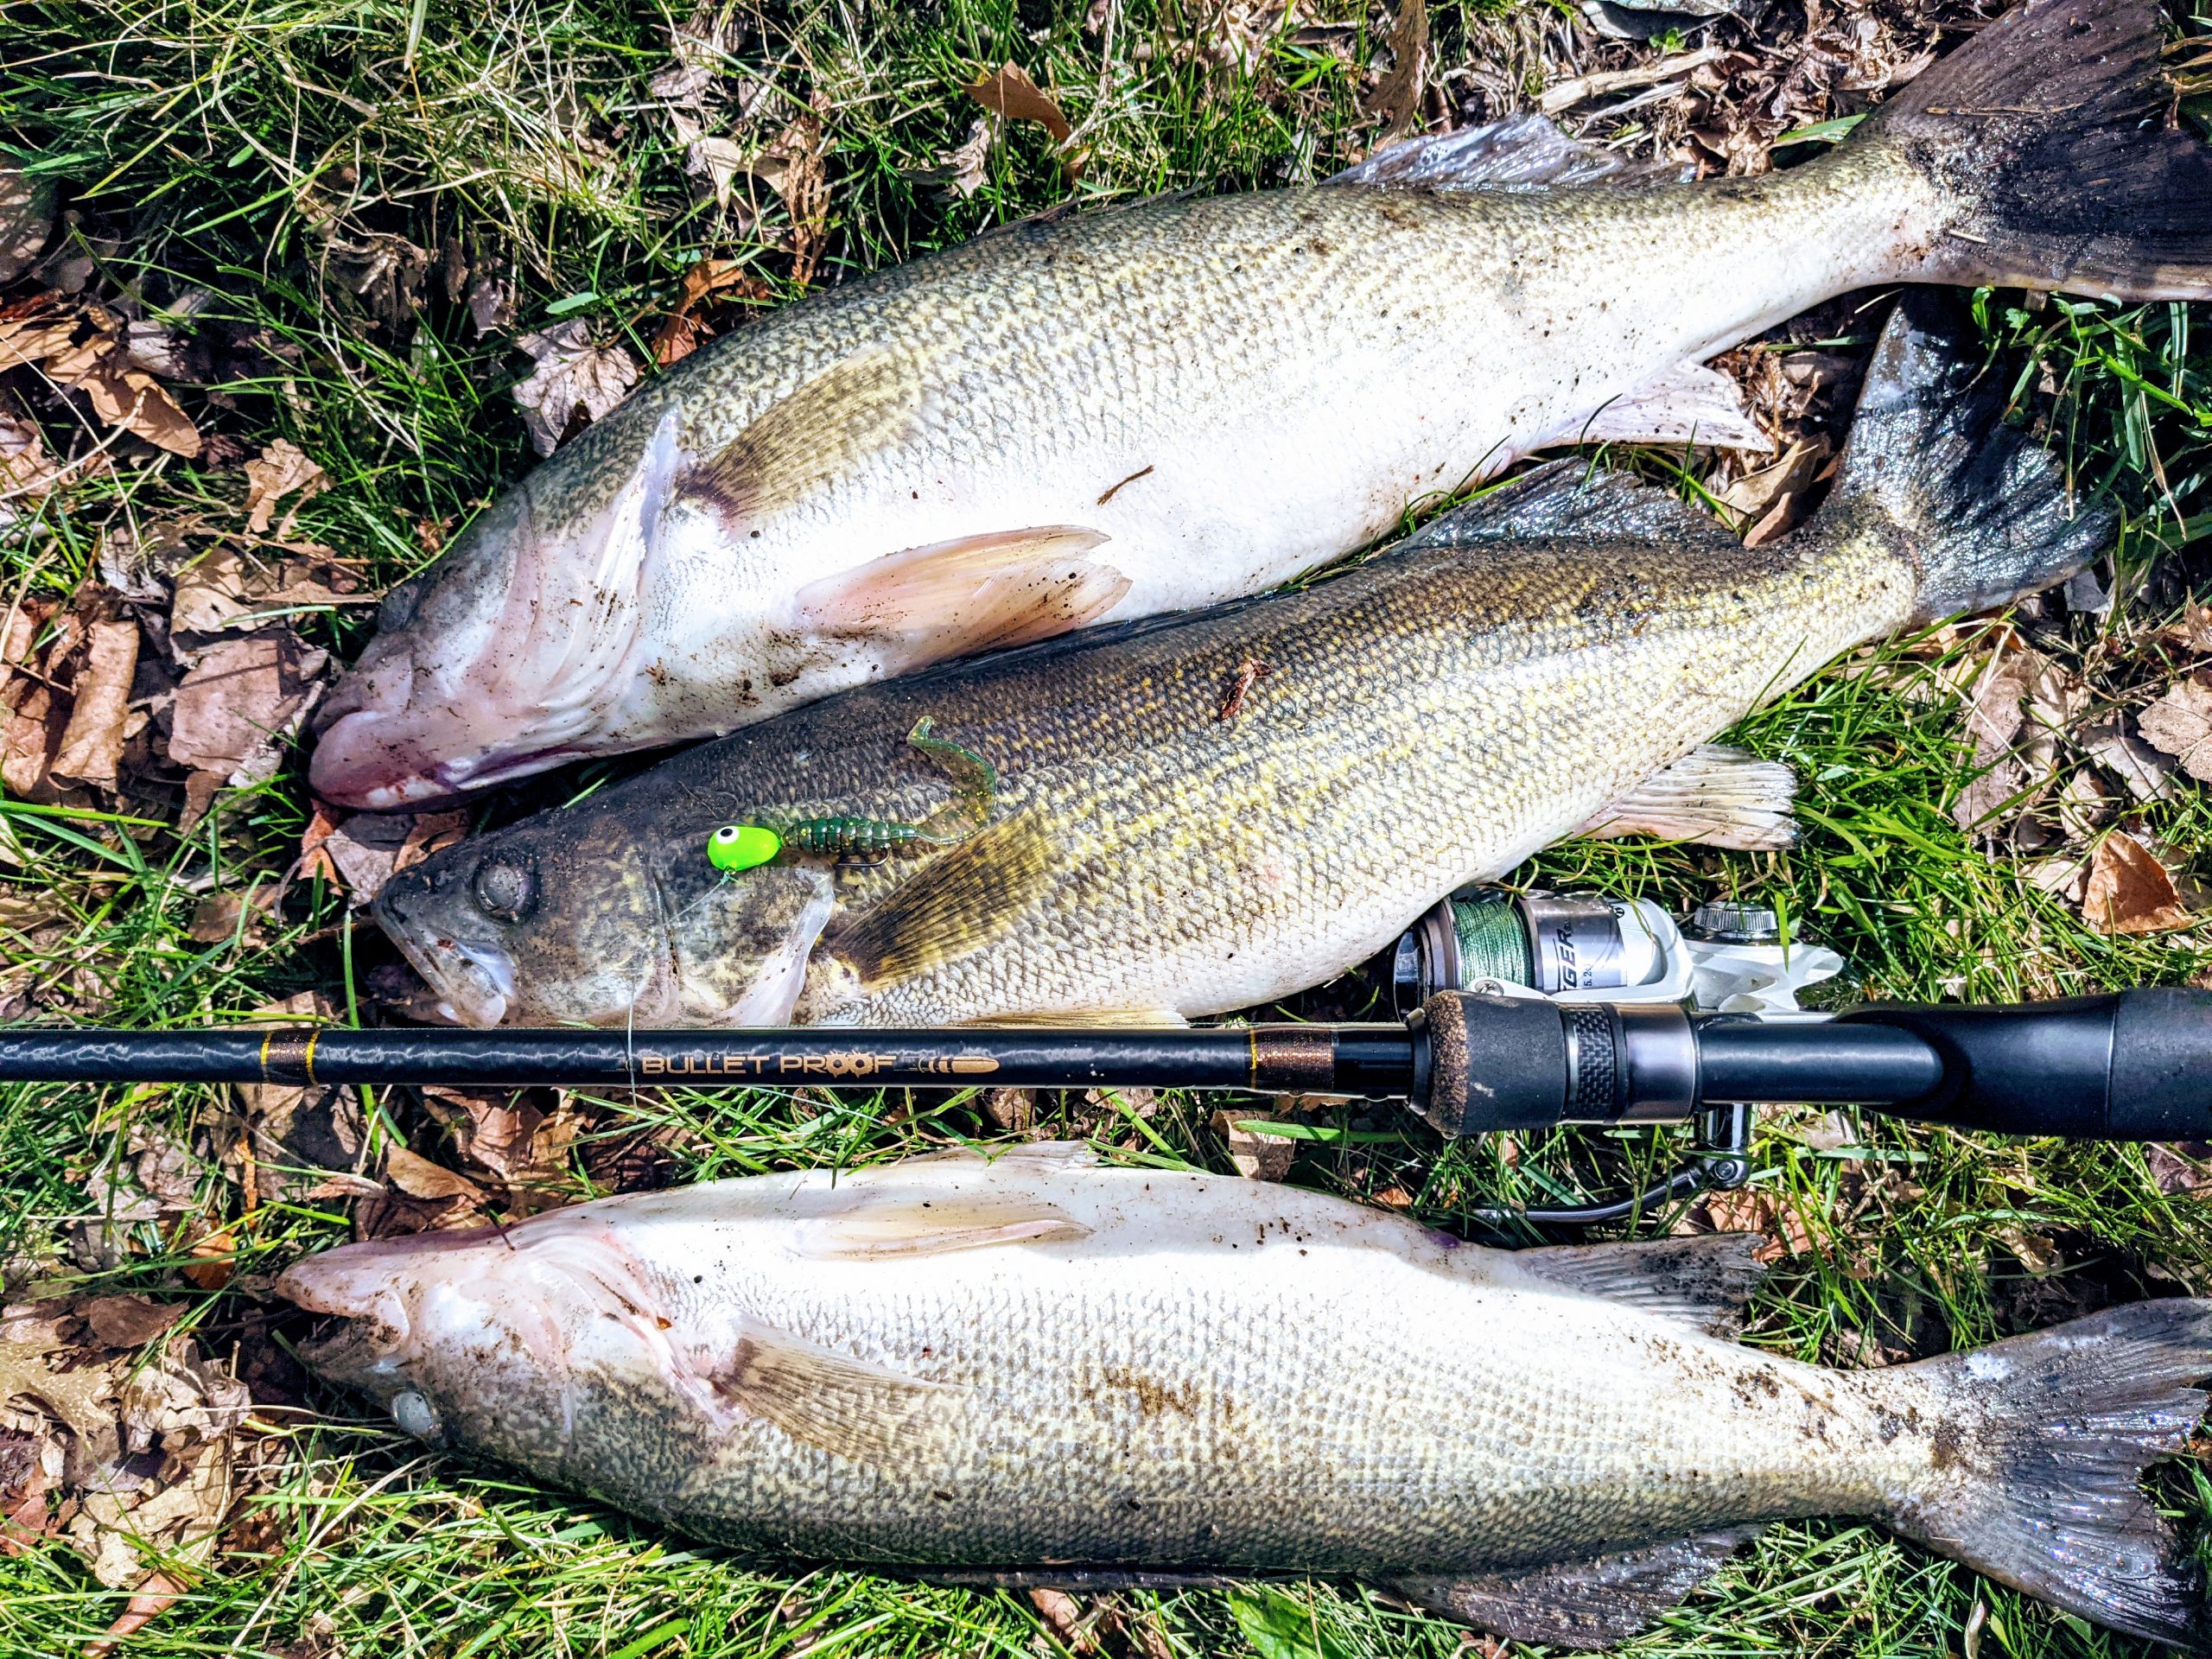 Maumee river Report- 28 March 2021